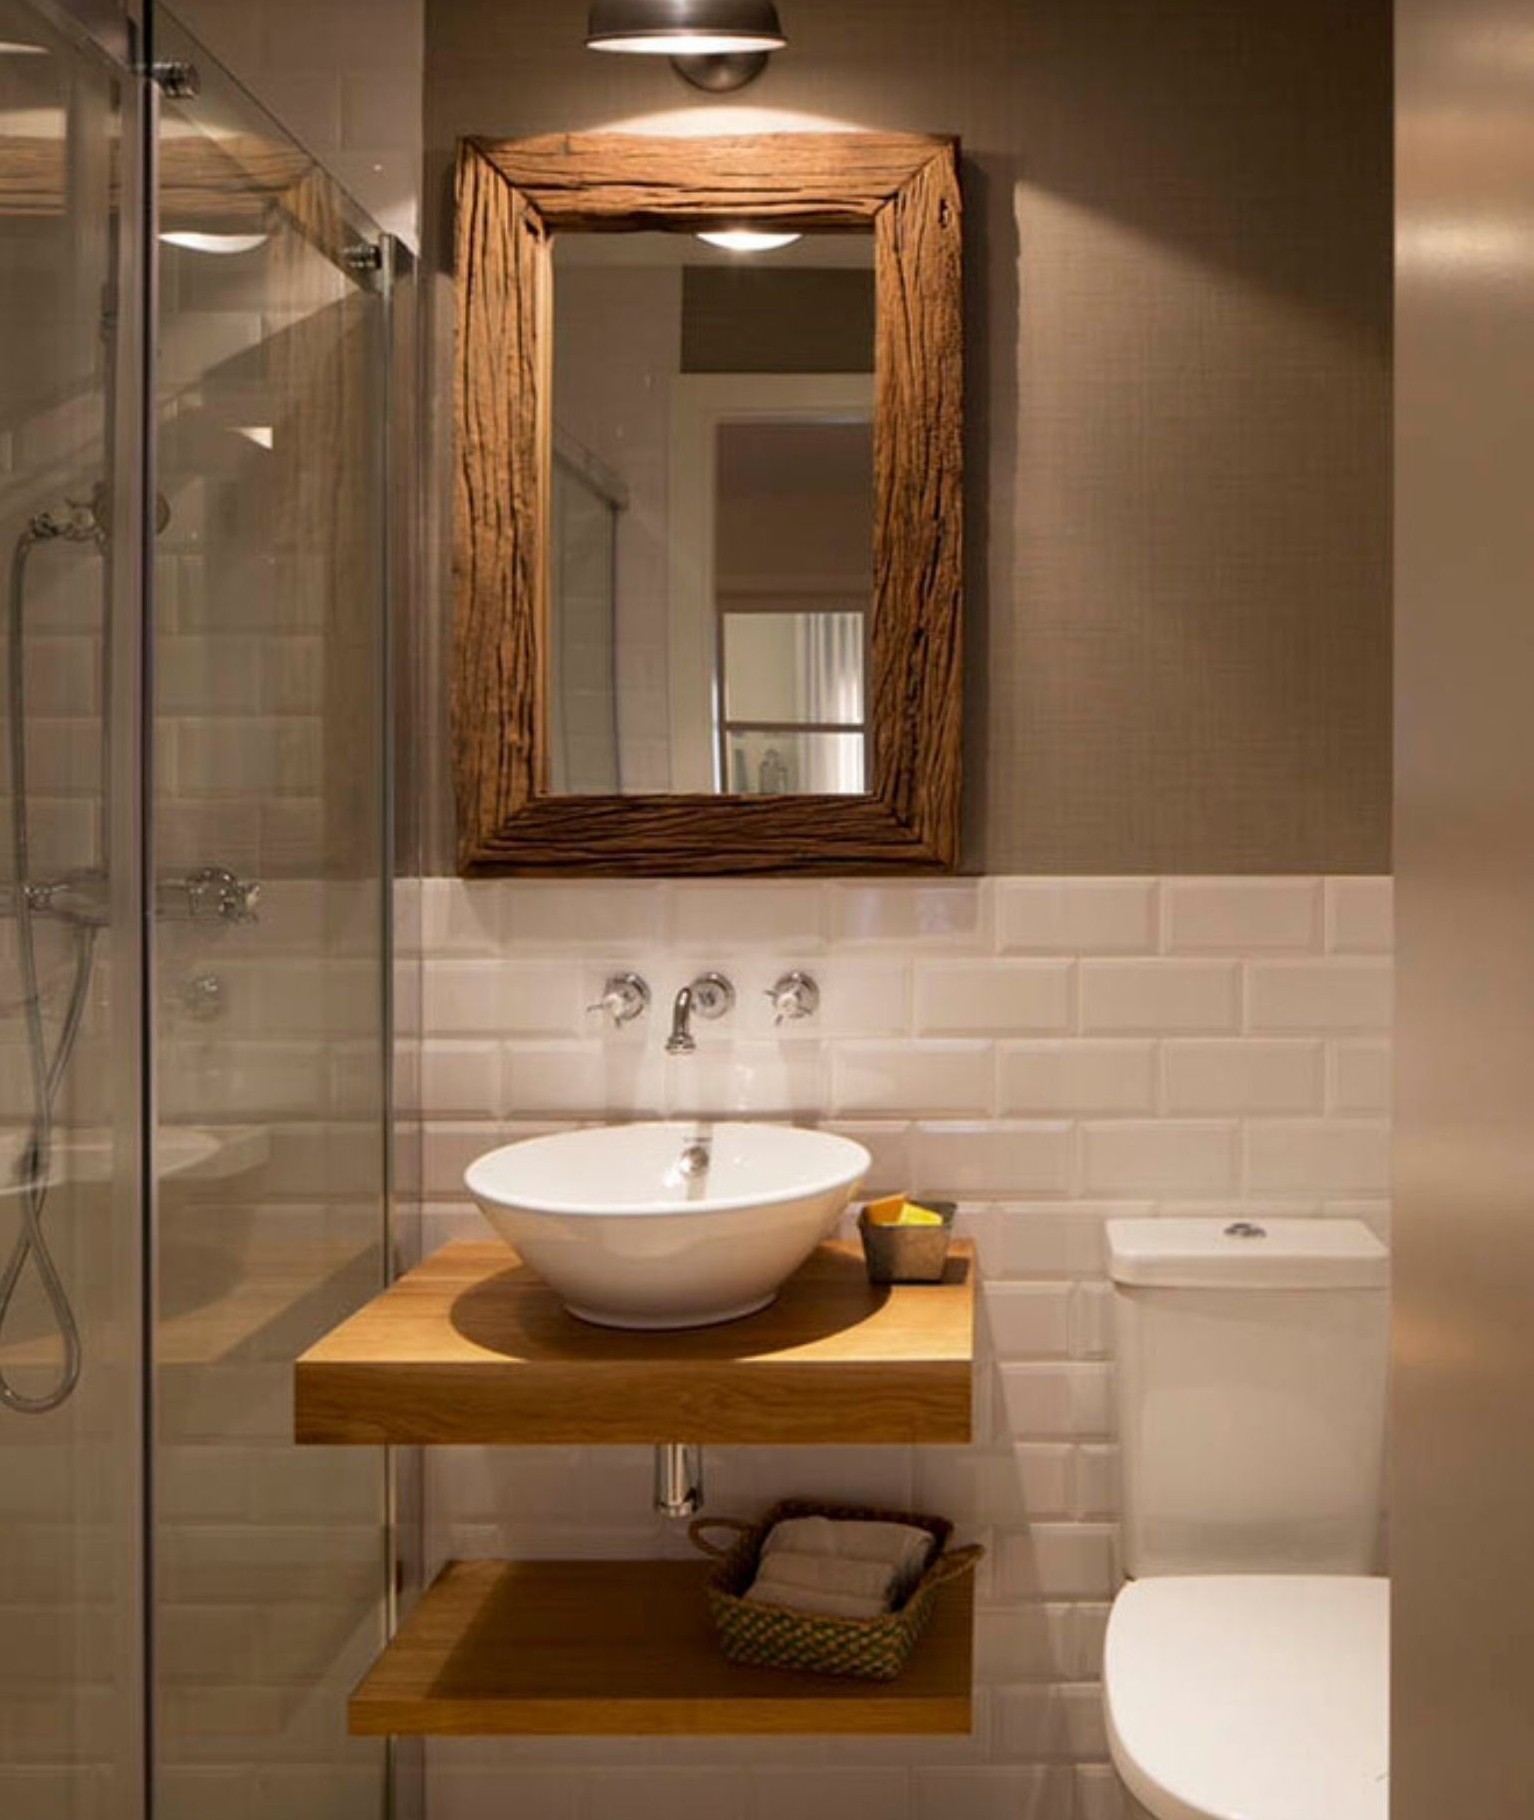 Lifestyle image of a white and brown bathroom design, featuring a wall mounted wooden shelf and countertop, a wooden framed mirror, grey-brown painted walls, white tiled walls and white ceramics 